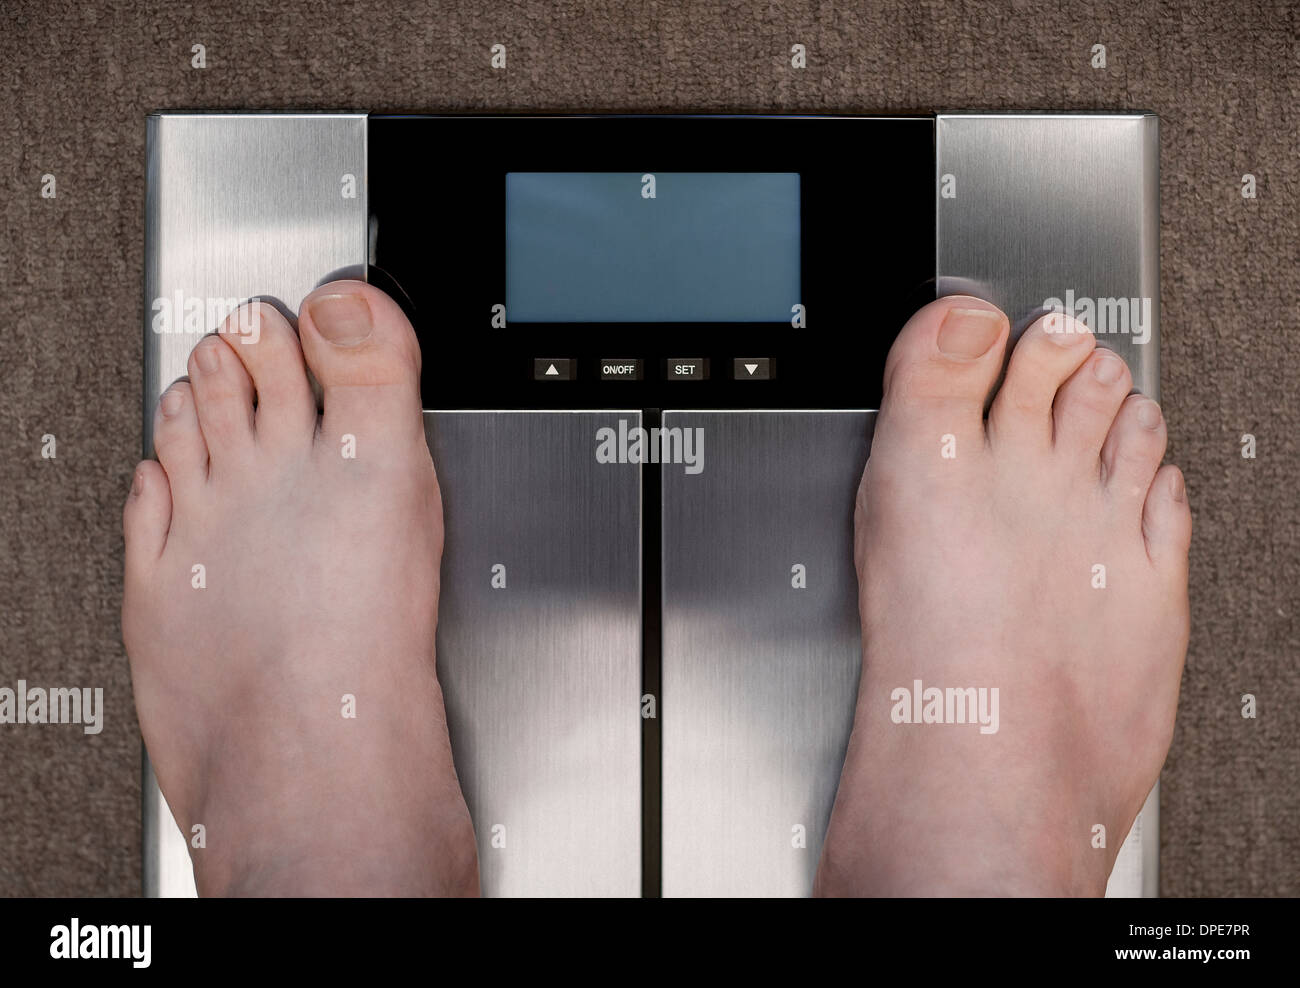 Man's Feet on Bathroom Scales on Carpet photographed from above with a Blank Display Stock Photo